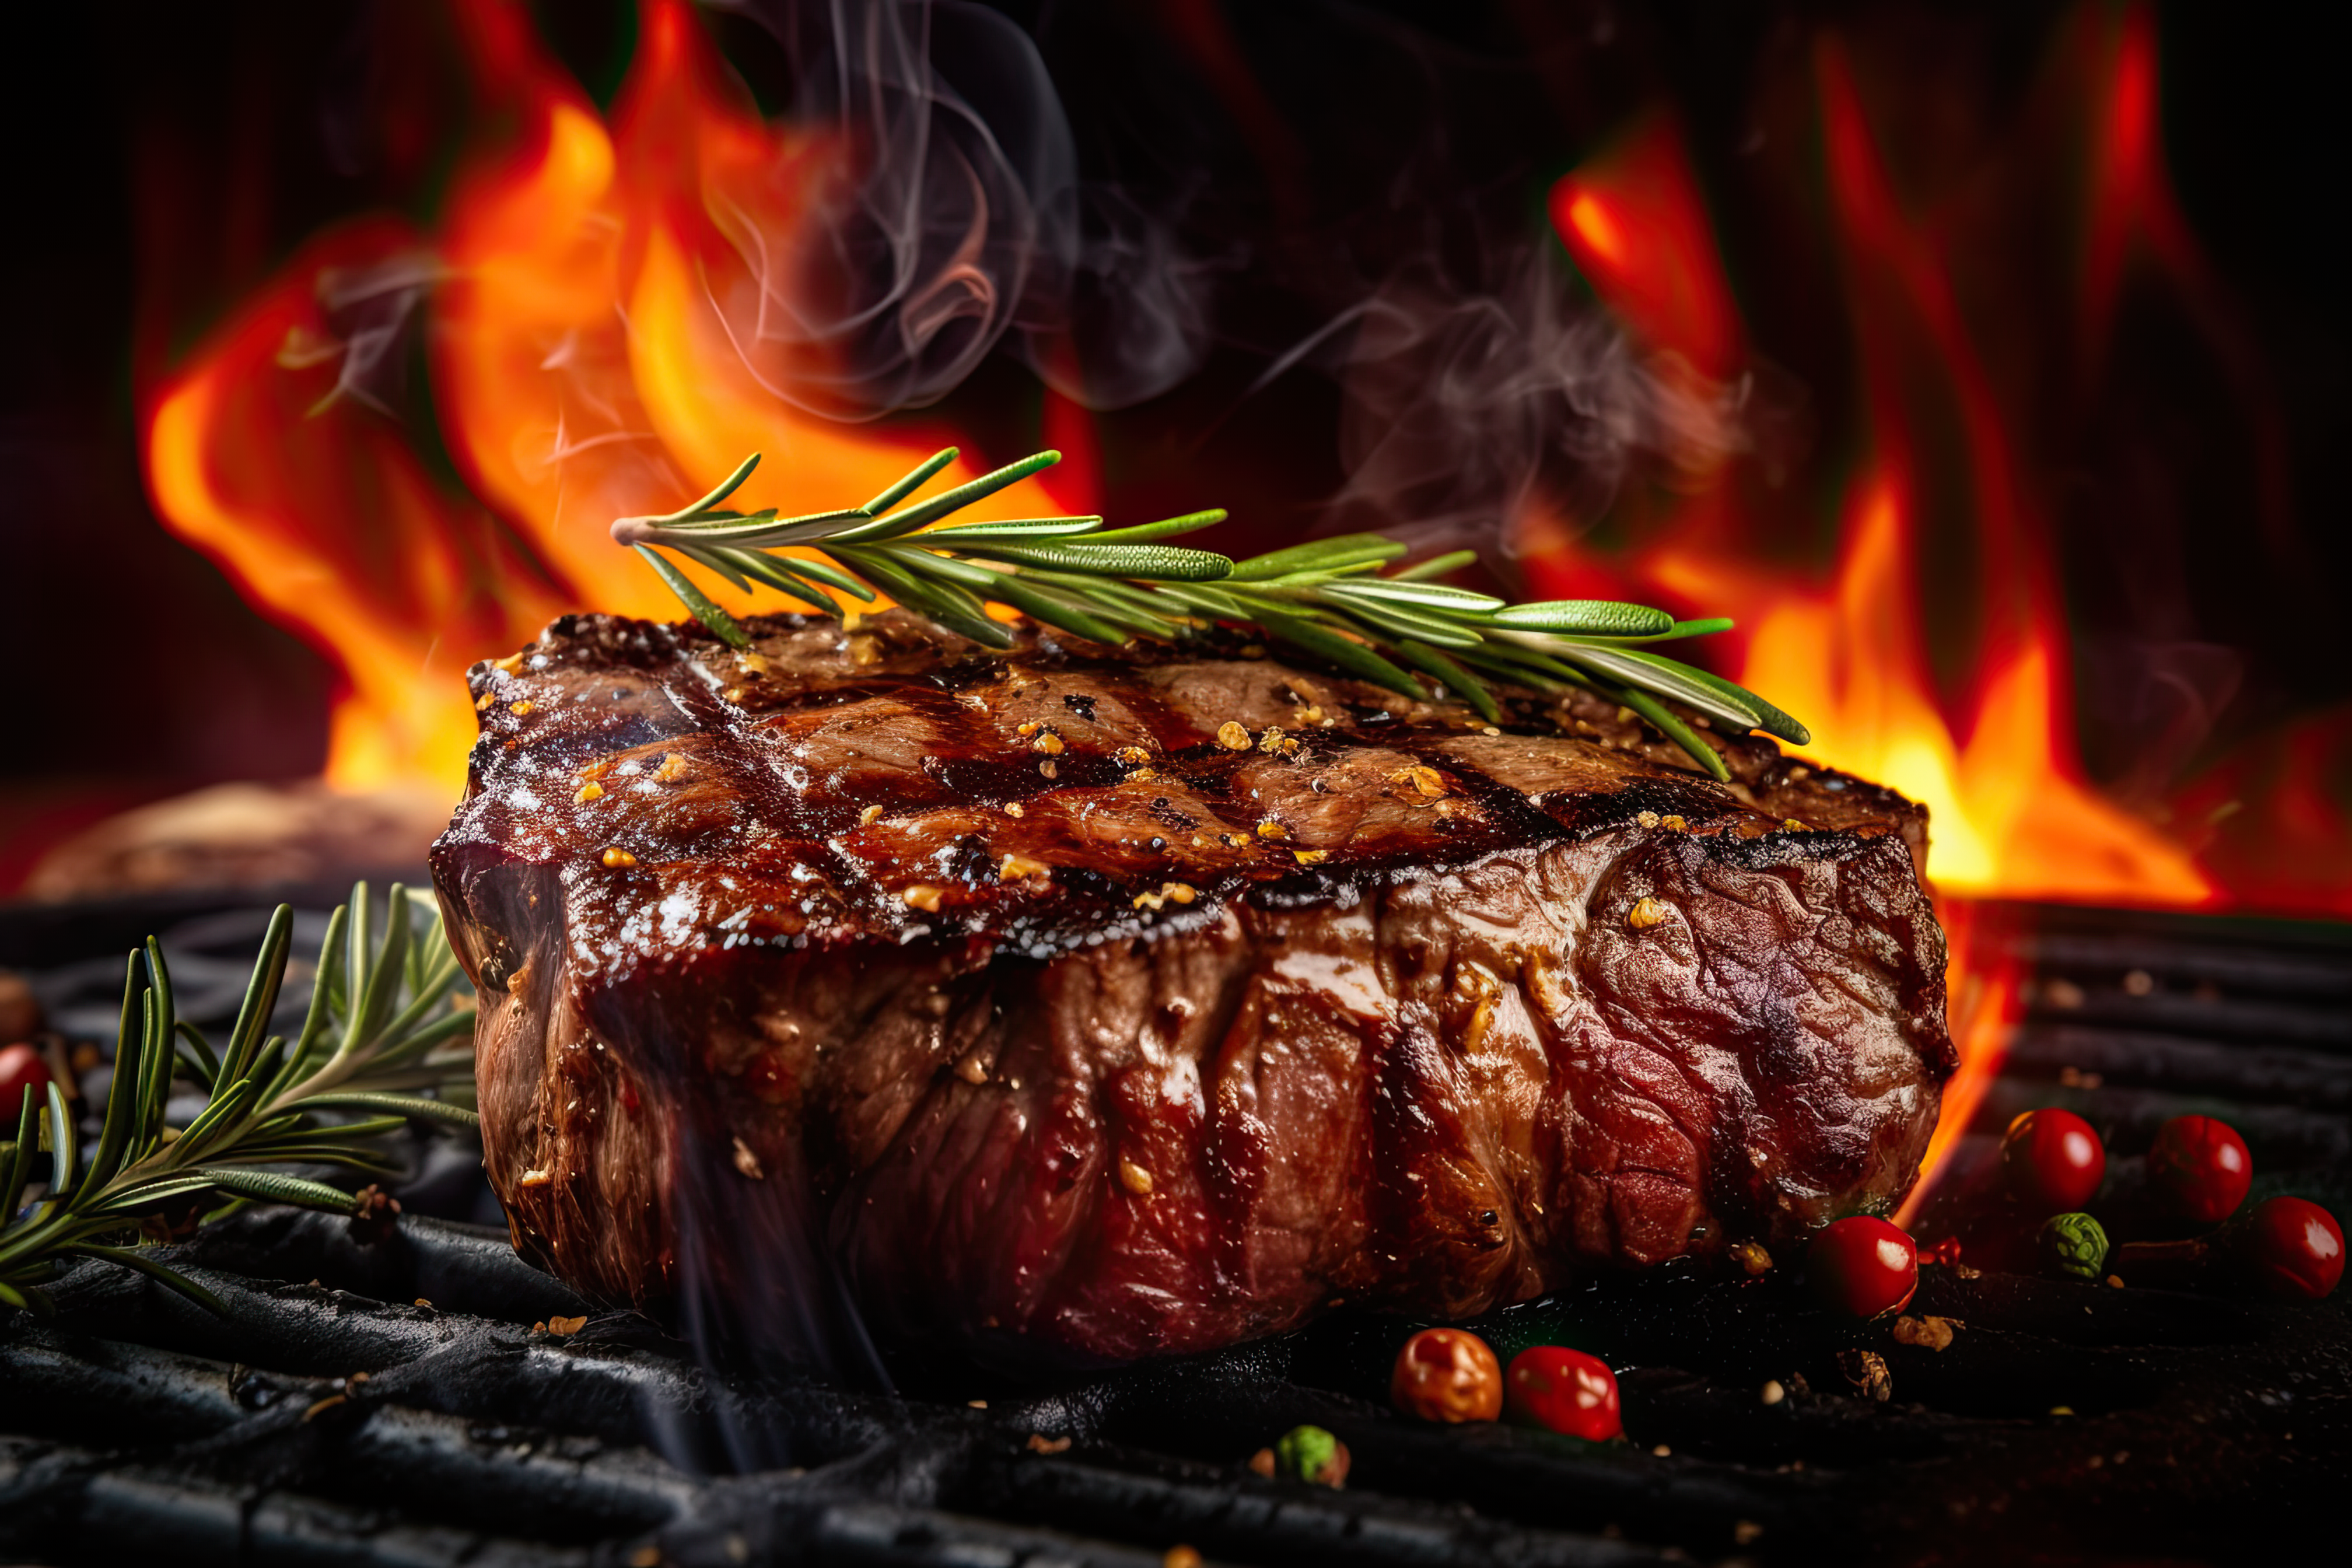 Beef steak on the grill with smoke and flames